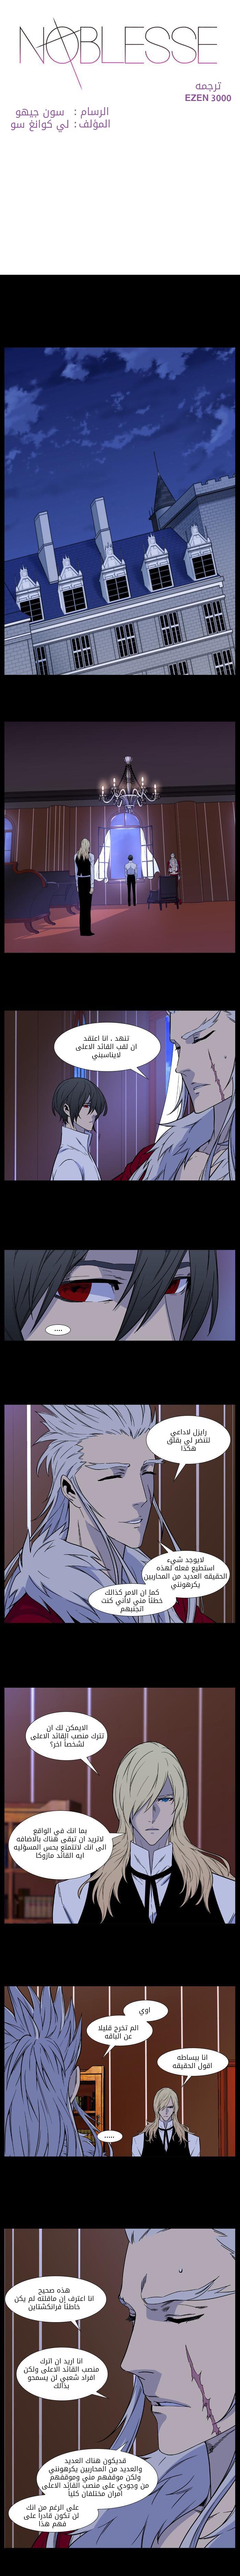 Noblesse: Chapter 499 - Page 1